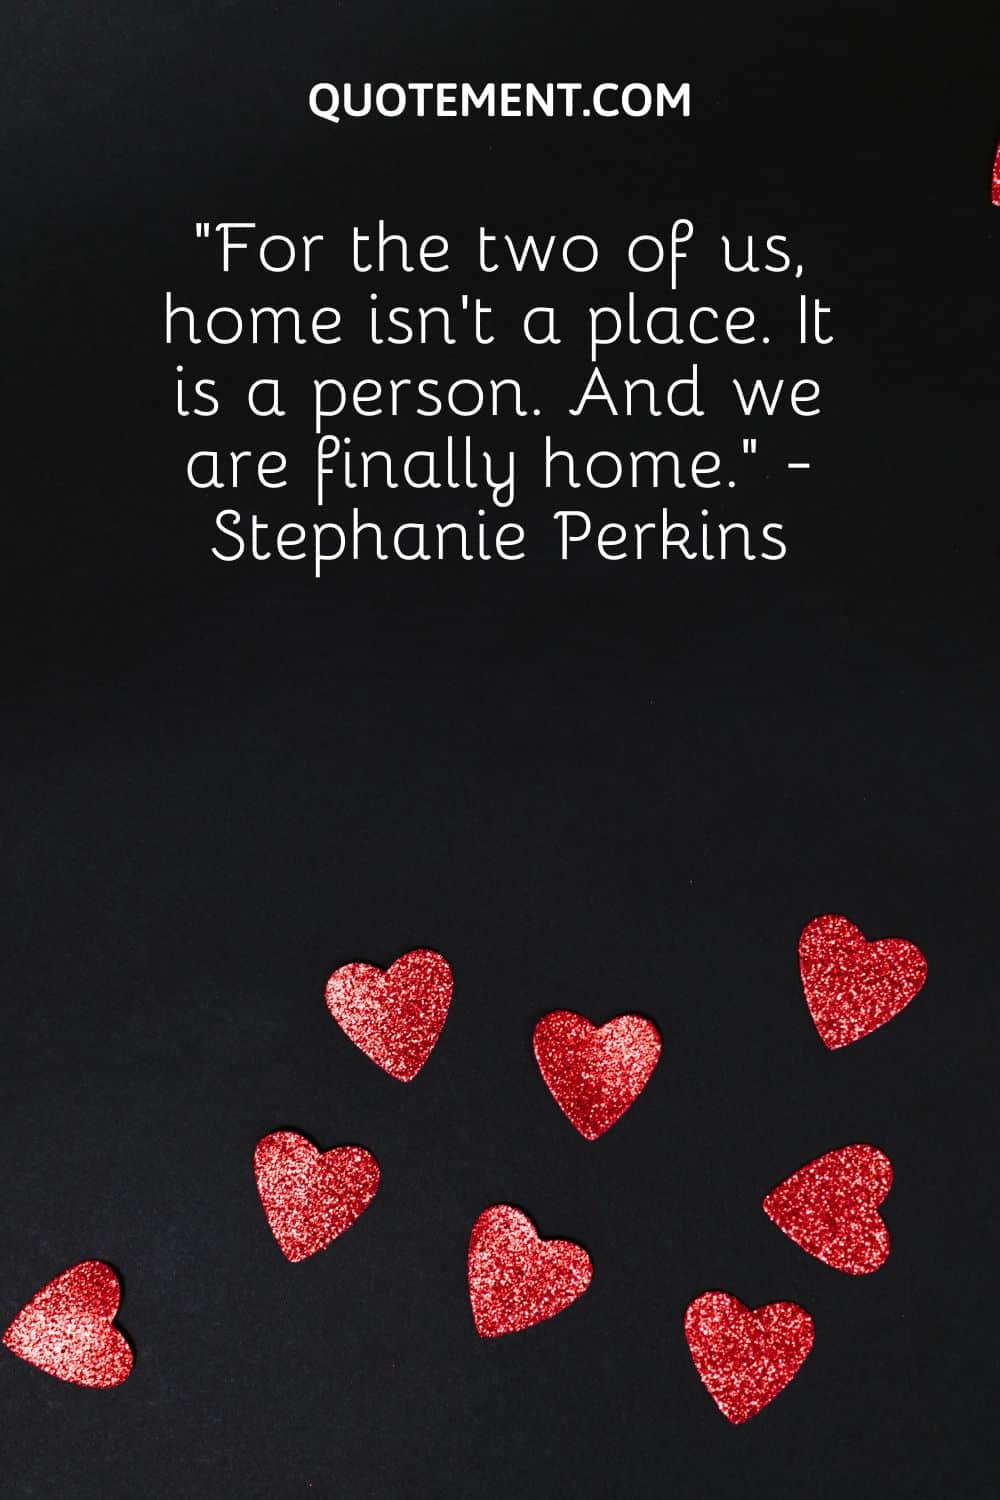 “For the two of us, home isn’t a place. It is a person. And we are finally home.” - Stephanie Perkins